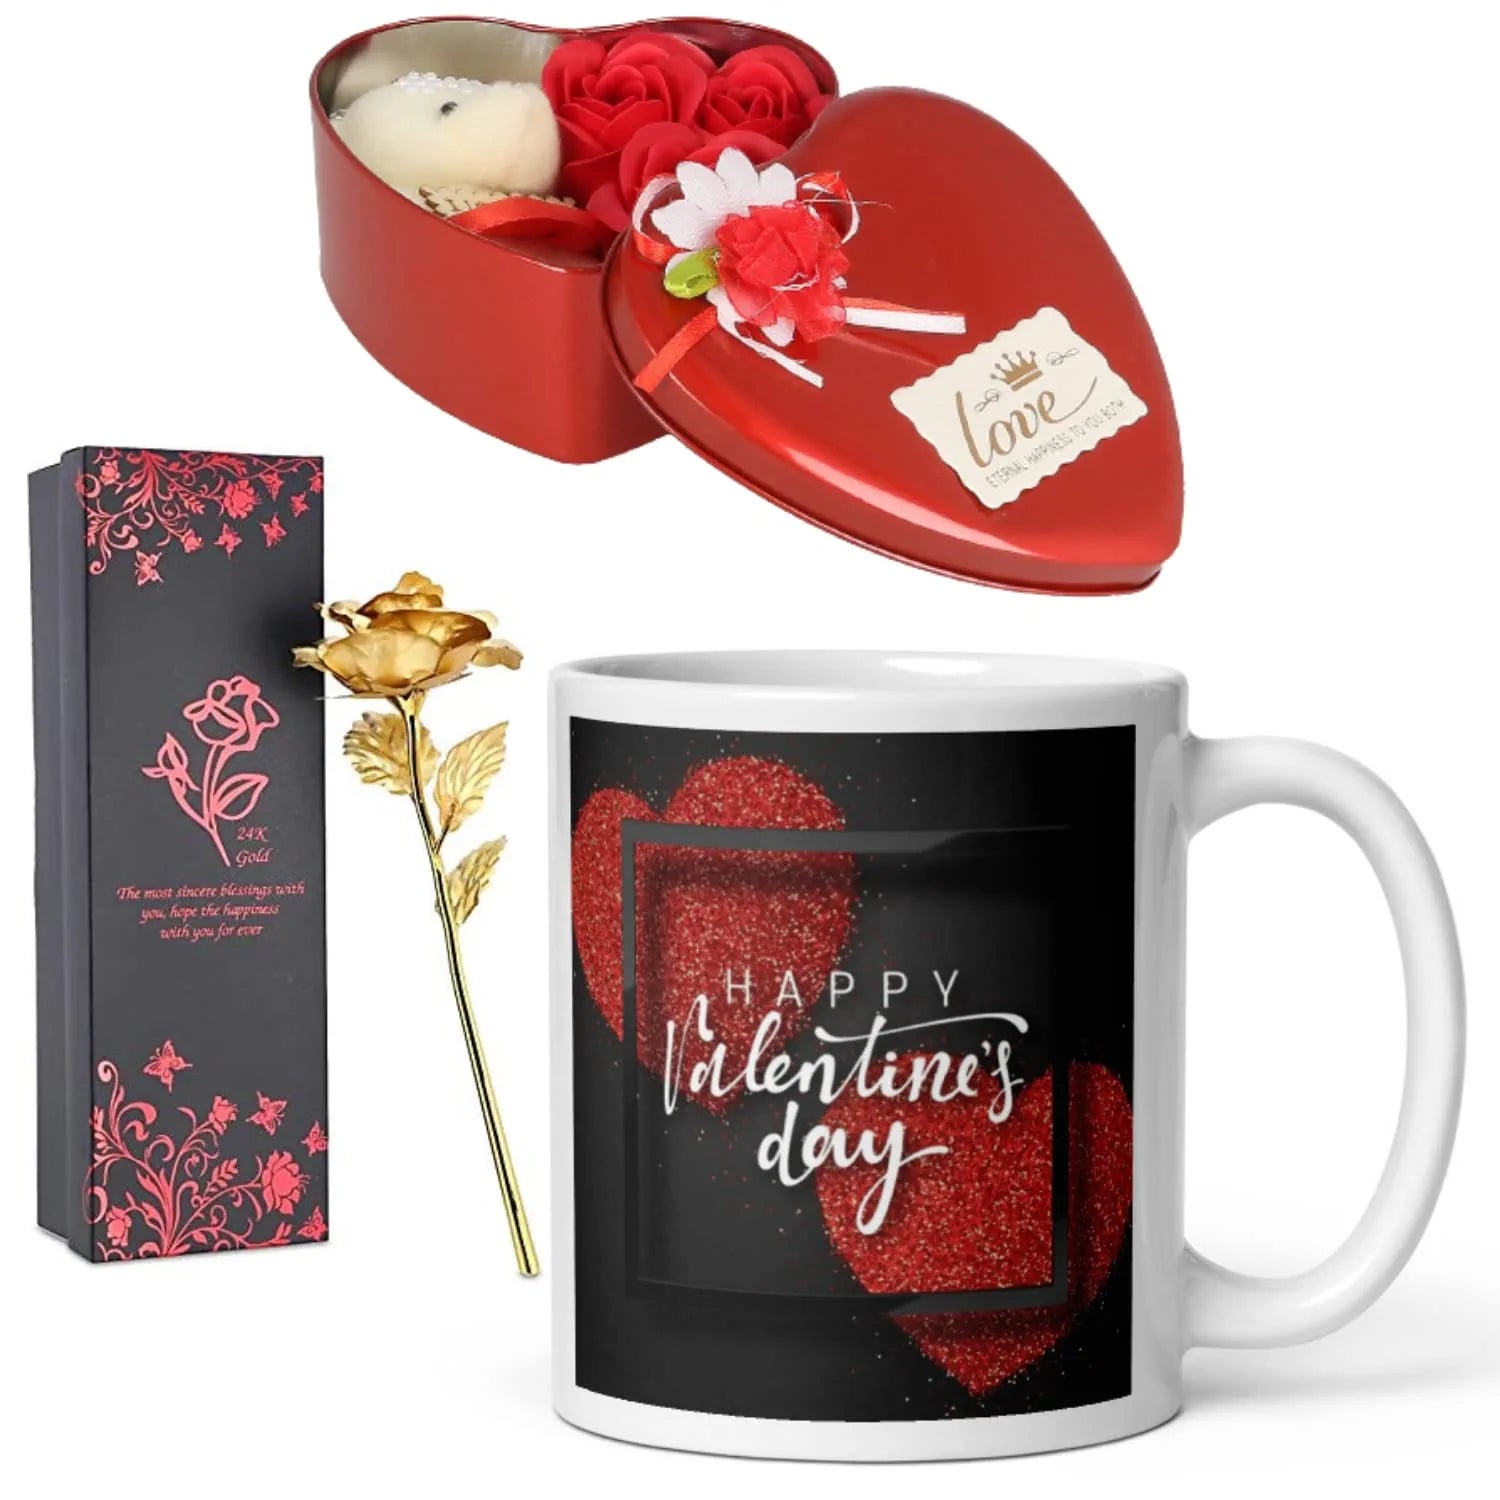 Special hugs for you Kids Valentine Gift Box